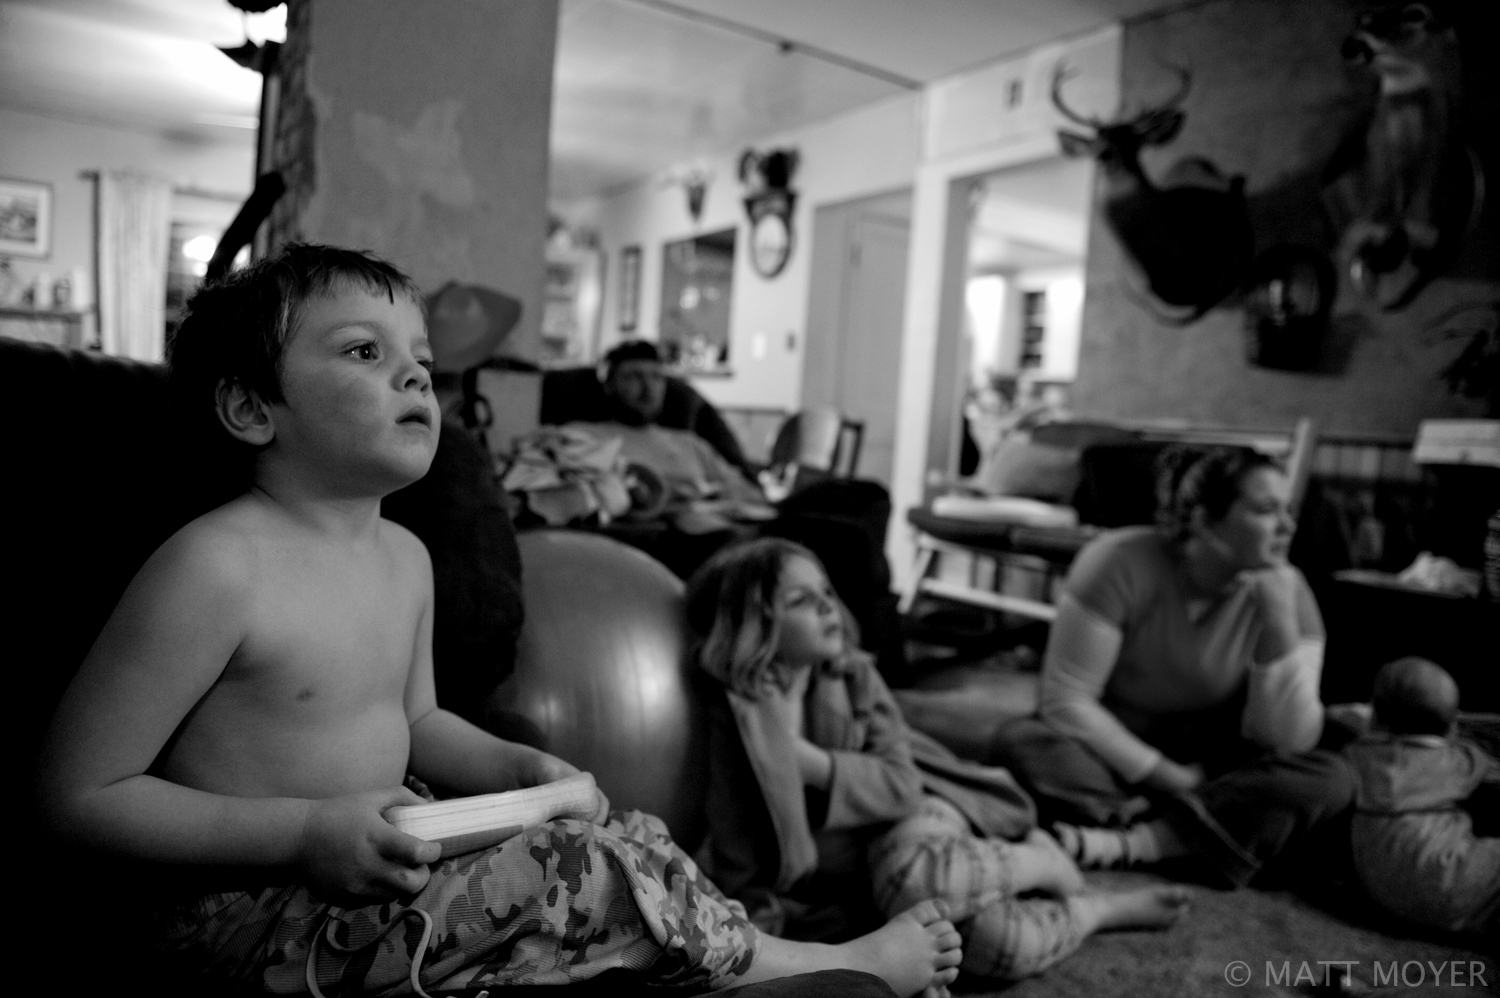  J Tidd, 4, plays video games as his father, Ed Tidd, a dairy farmer in up state New York, sits in the background. Ed Tidd is in business with his father Joe Tidd running the small dairy operation. 